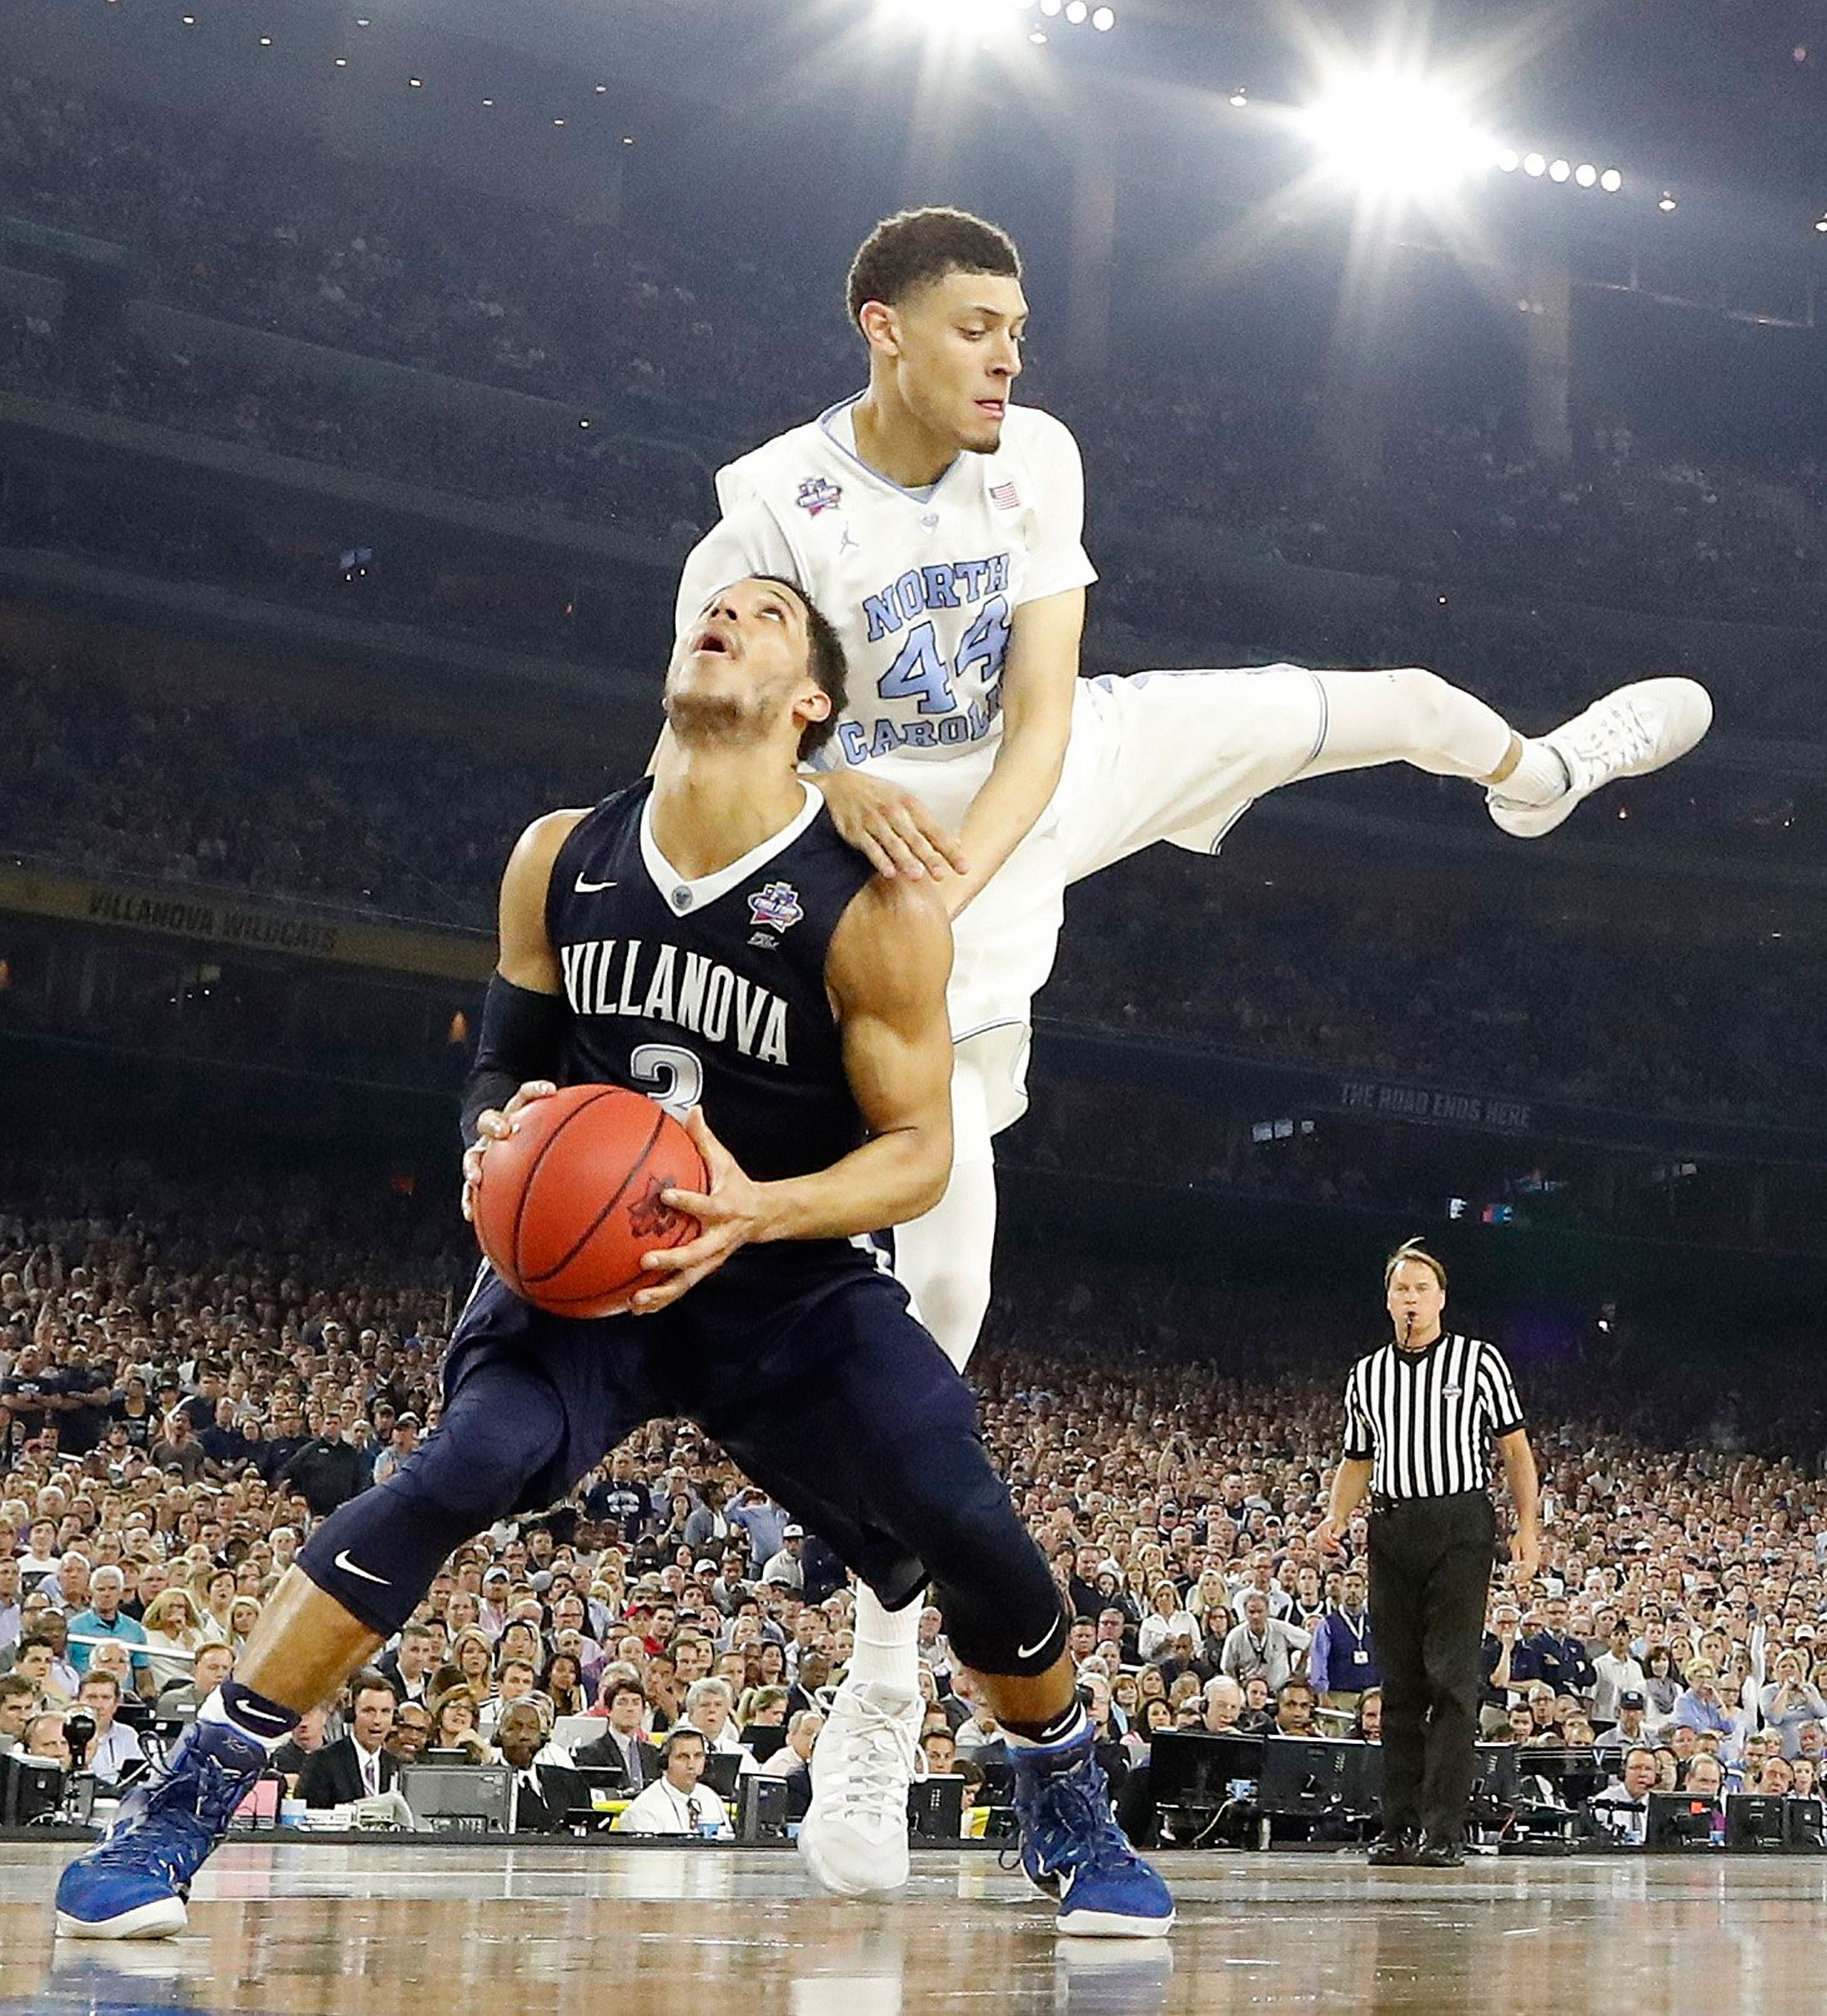 Villanova guard Josh Hart (3) prepares to shoots as North Carolina forward Justin Jackson (44) defends during the second half of the NCAA college basketball National Championship game on April 4, 2016 in Houston.